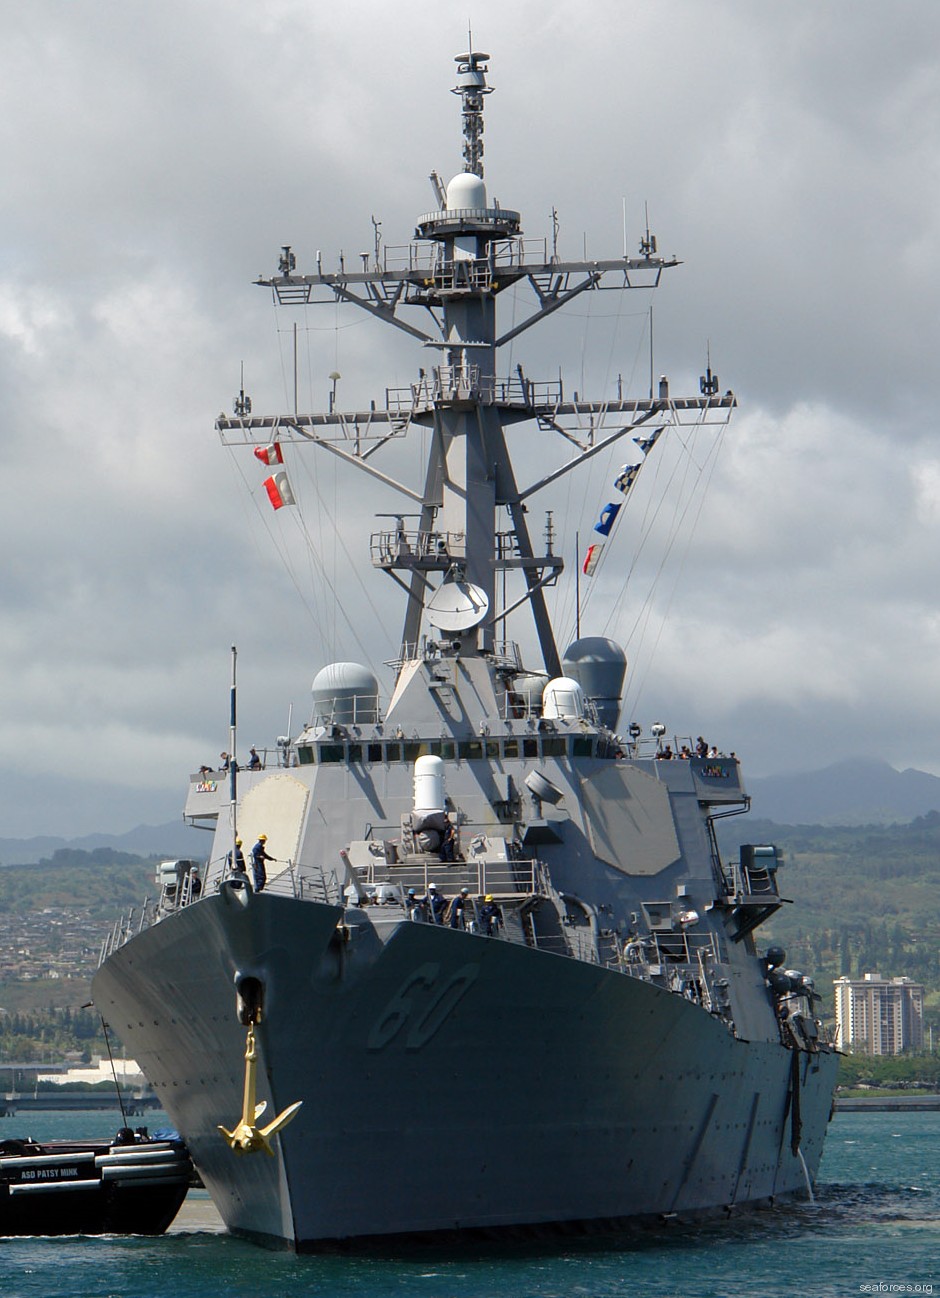 ddg-60 uss paul hamilton guided missile destroyer us navy 37